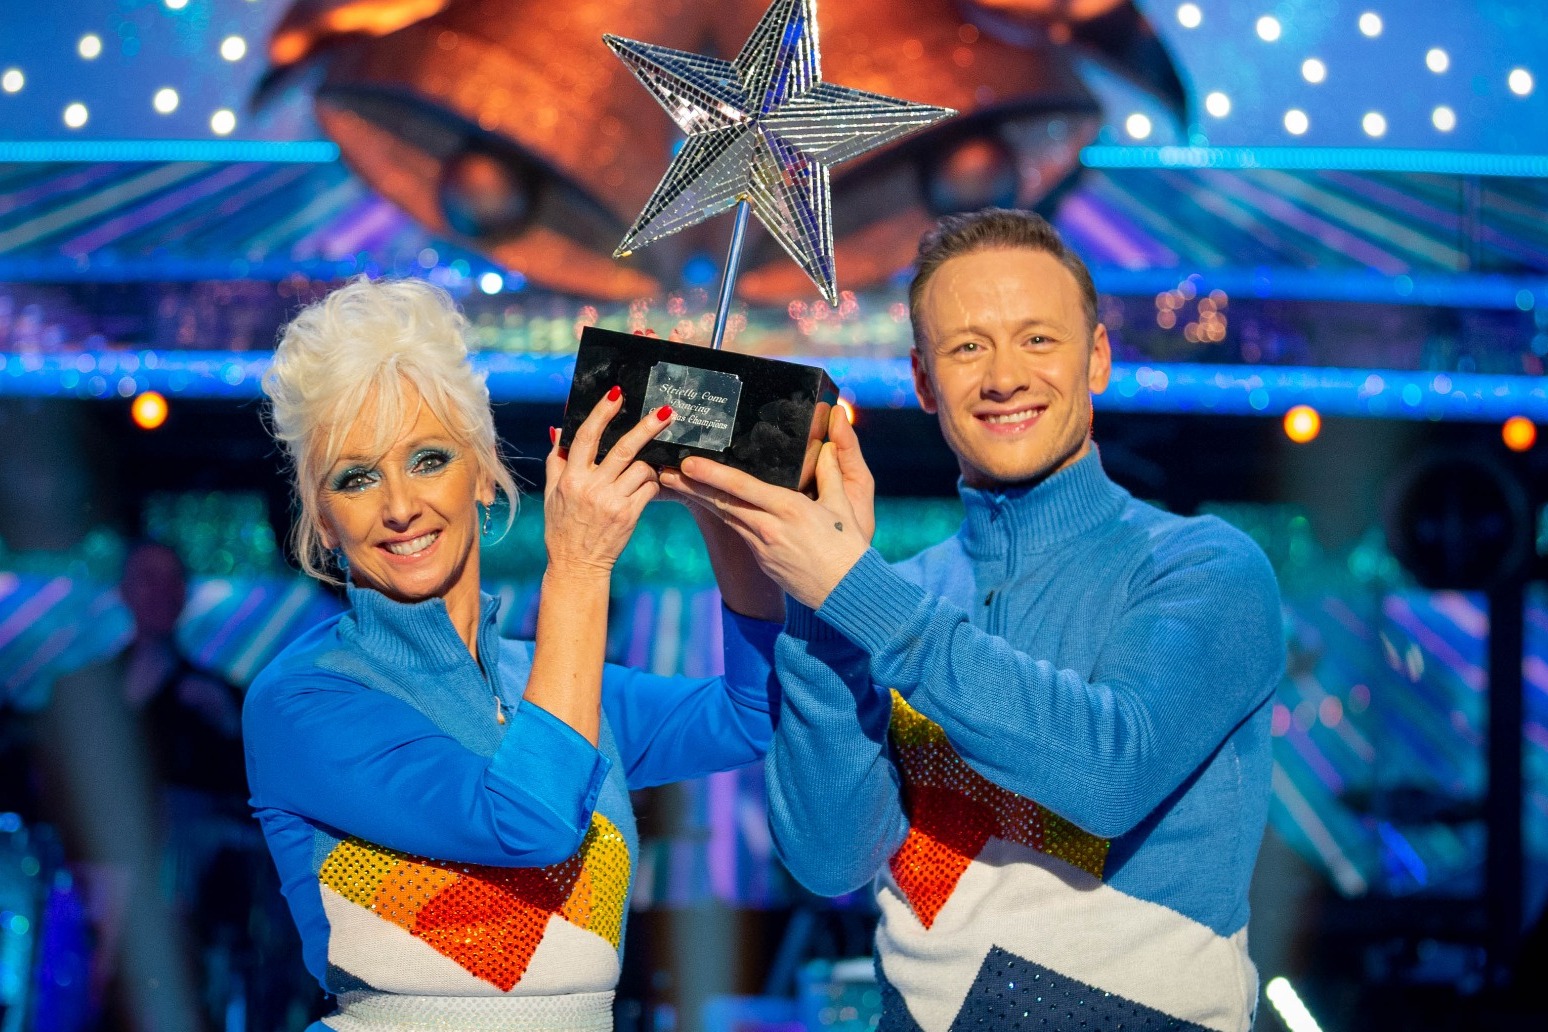 Kevin Clifton on whether Strictly background helped his time on ITV’s The Games 